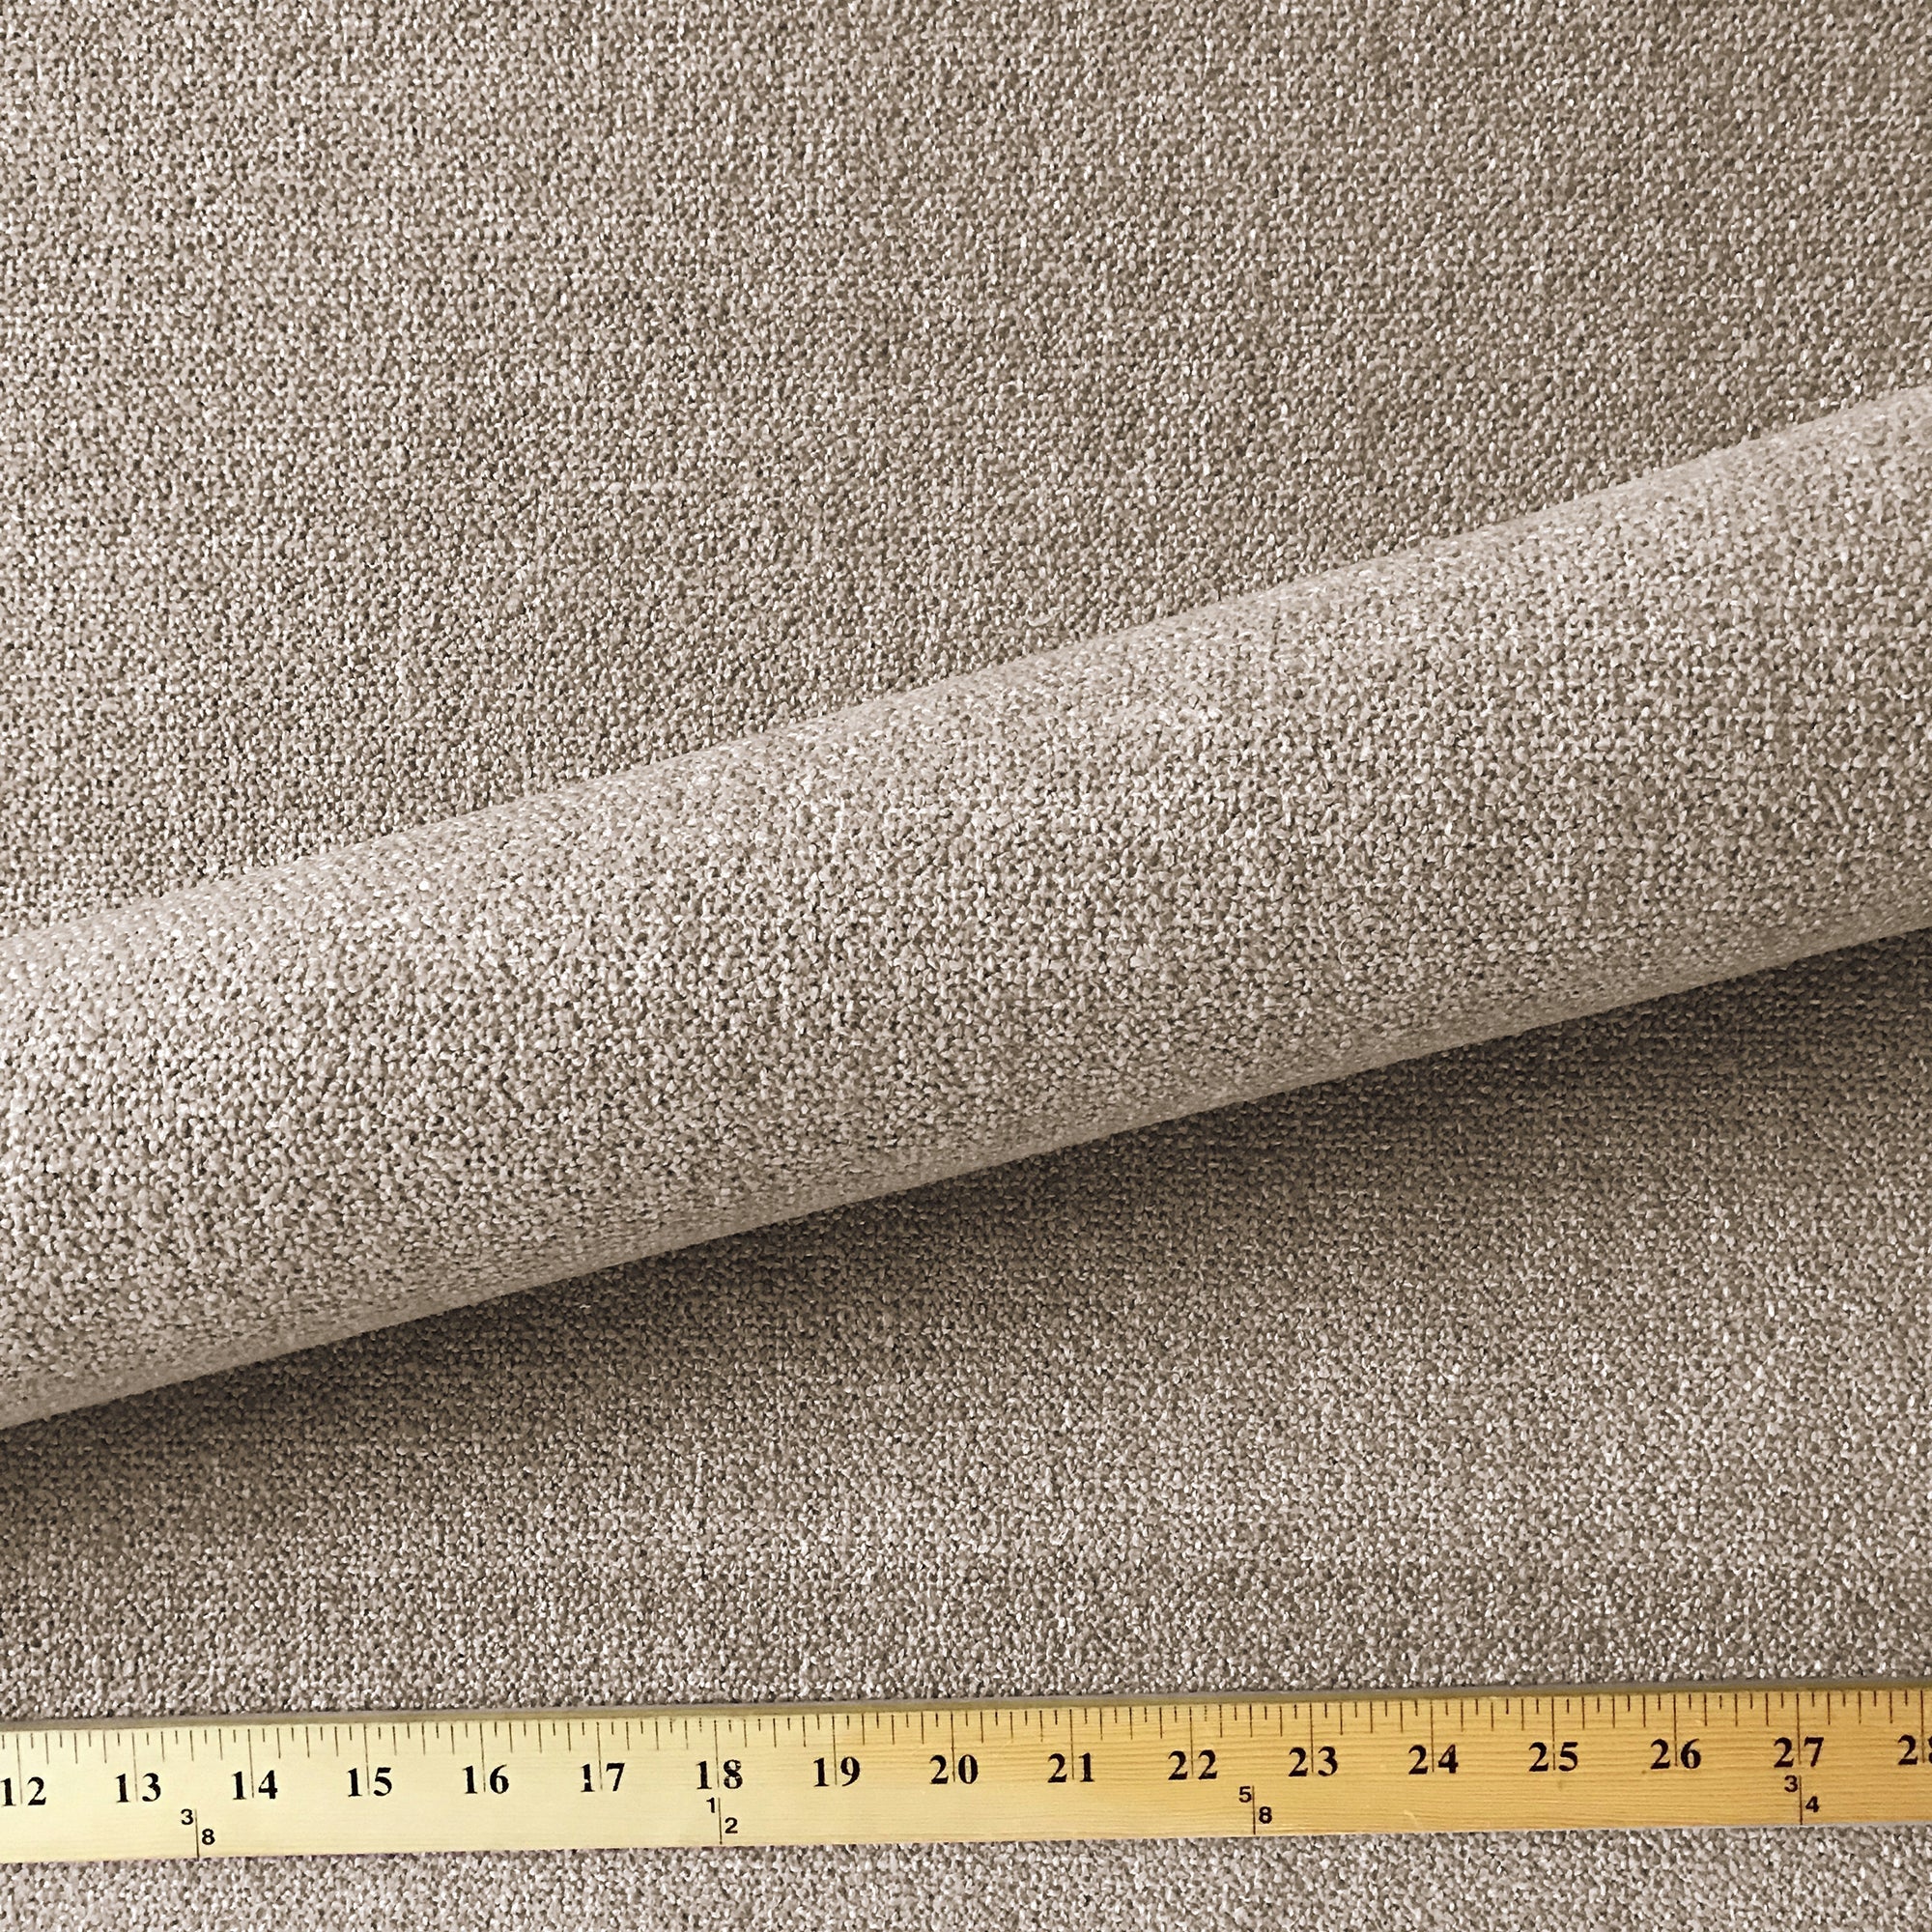 How to choose upholstery fabric for furniture? – Part 2 - Alankaram